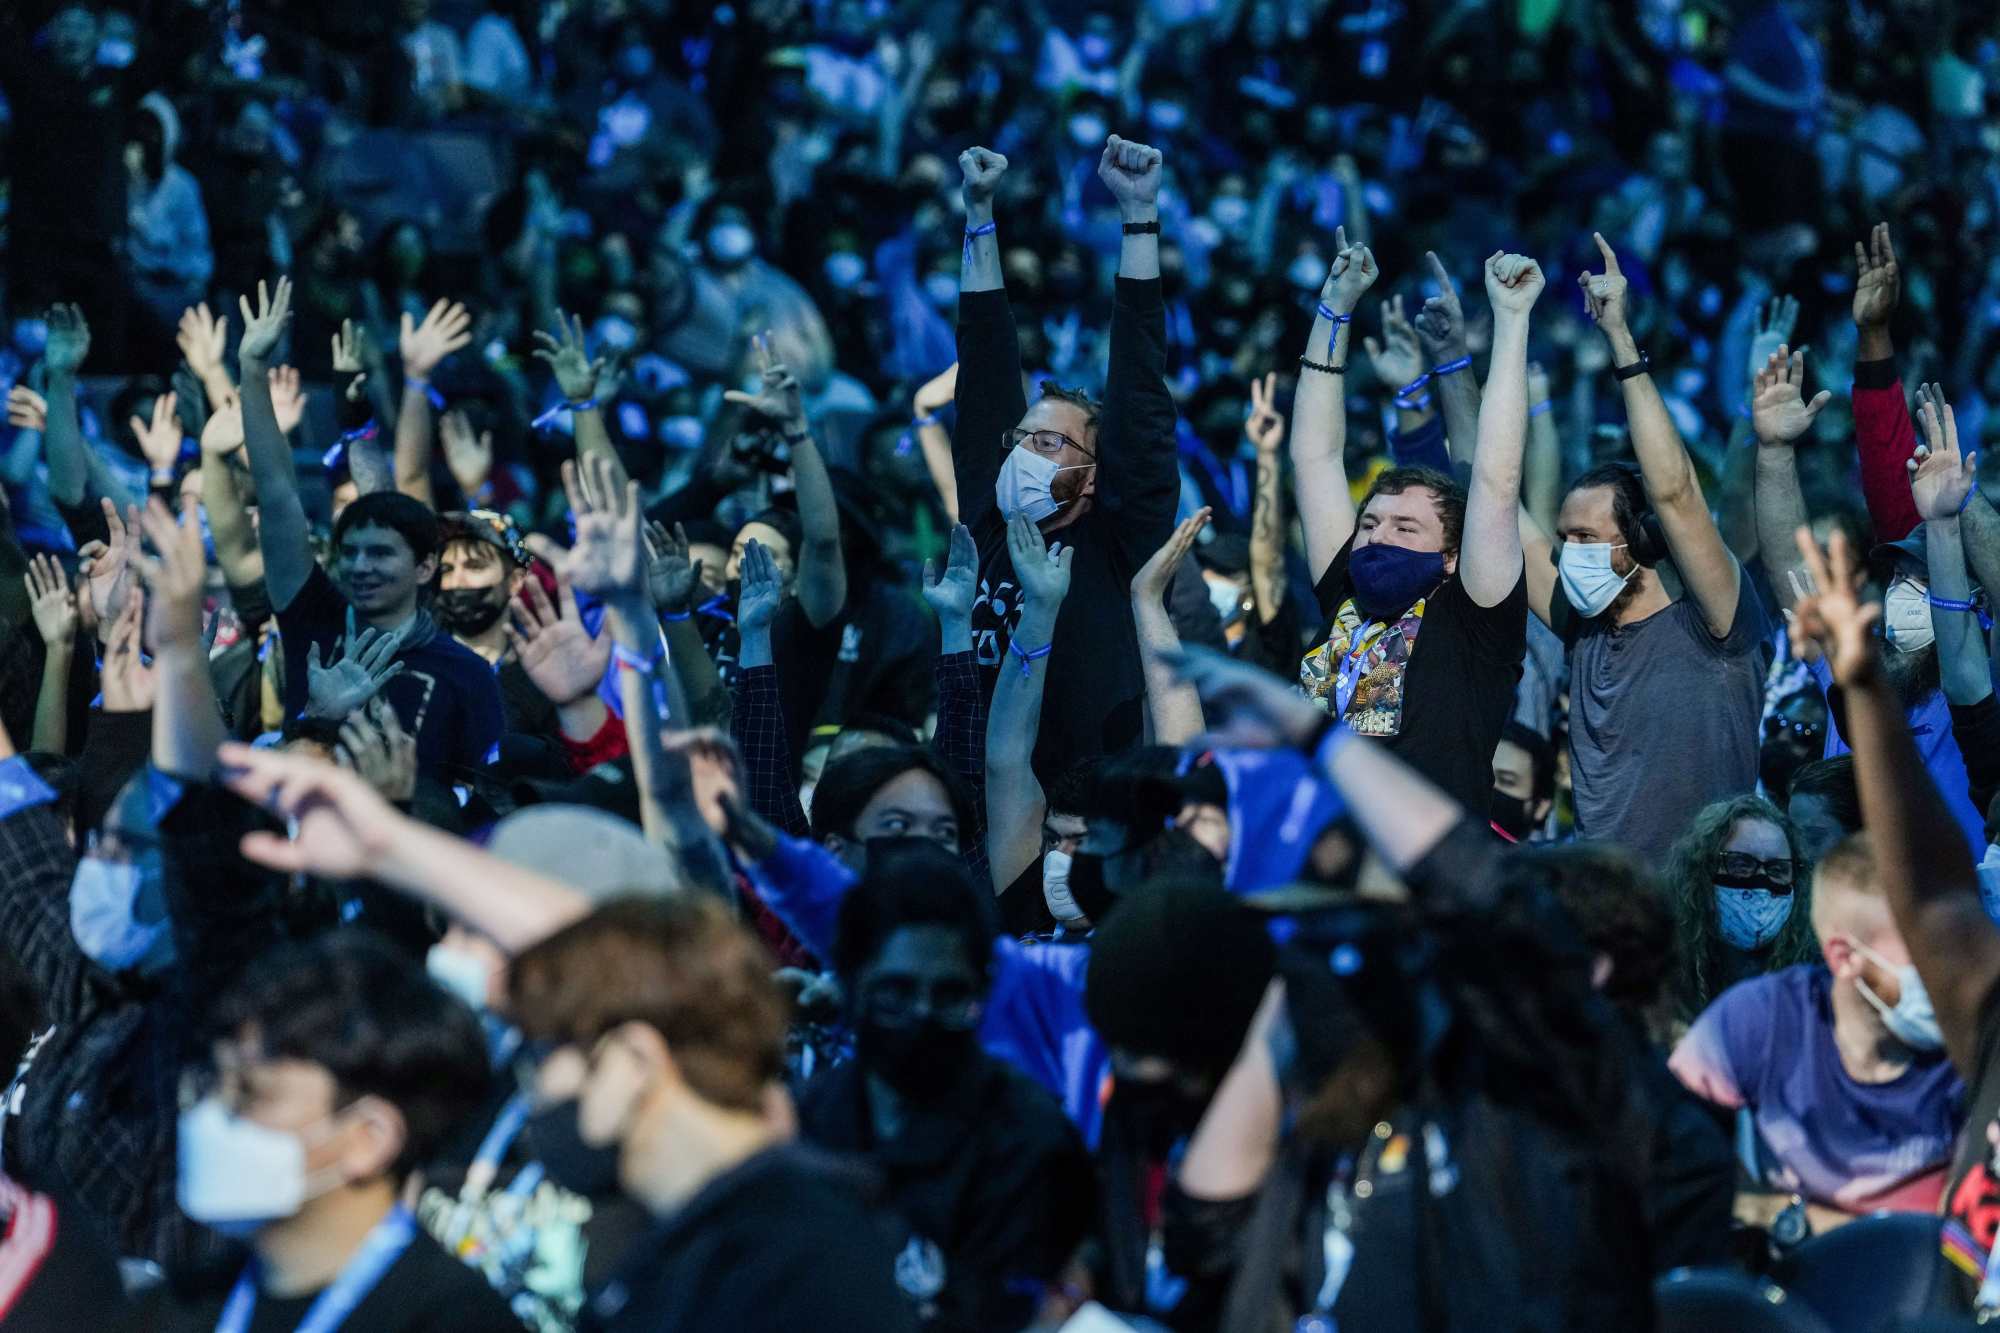 Compared with the situation in China, esports tournaments in the United States are growing their live audience. Fans watch the EVO 2022 Tekken 7 tournament at Mandalay Bay Resort and Casino on August 07, 2022 in Las Vegas, Nevada. Photo: Agence France-Presse